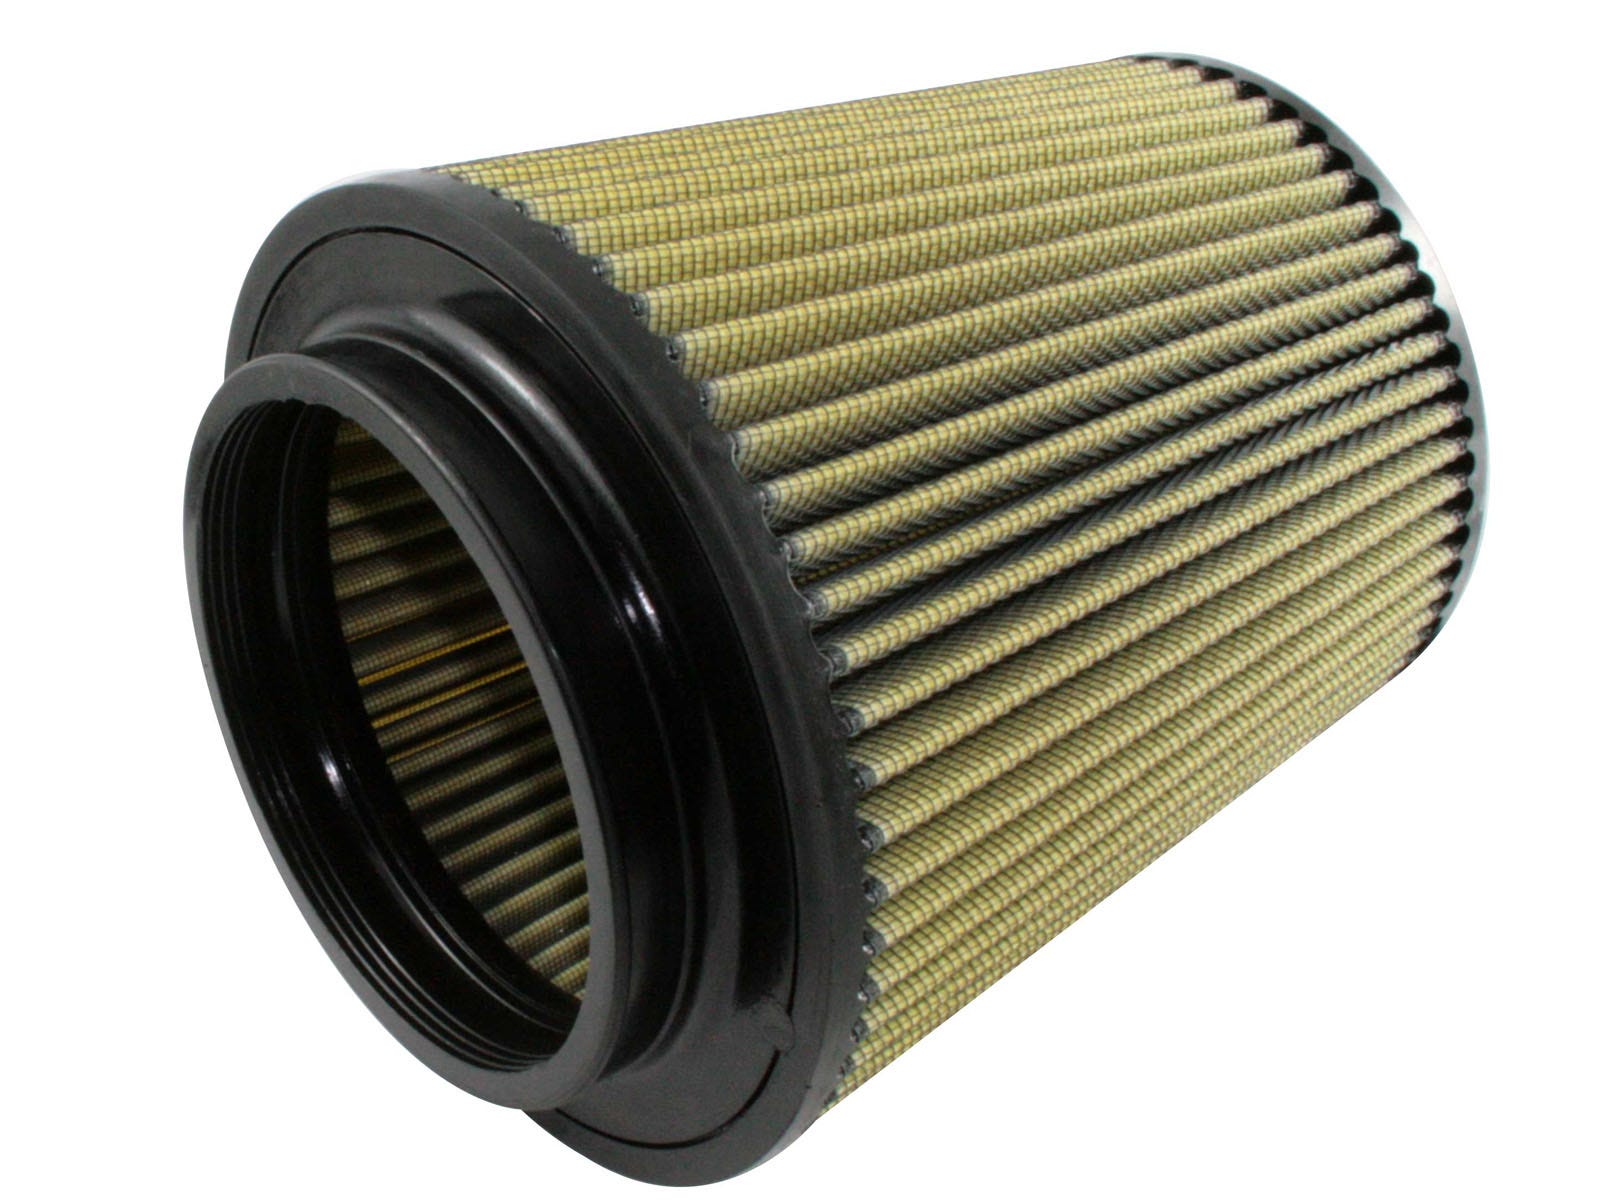 Magnum FORCE Intake Replacement Air Filter w/ Pro GUARD 7 Media 6 IN F x 9 IN B x 7 IN T x 9 IN H - 0